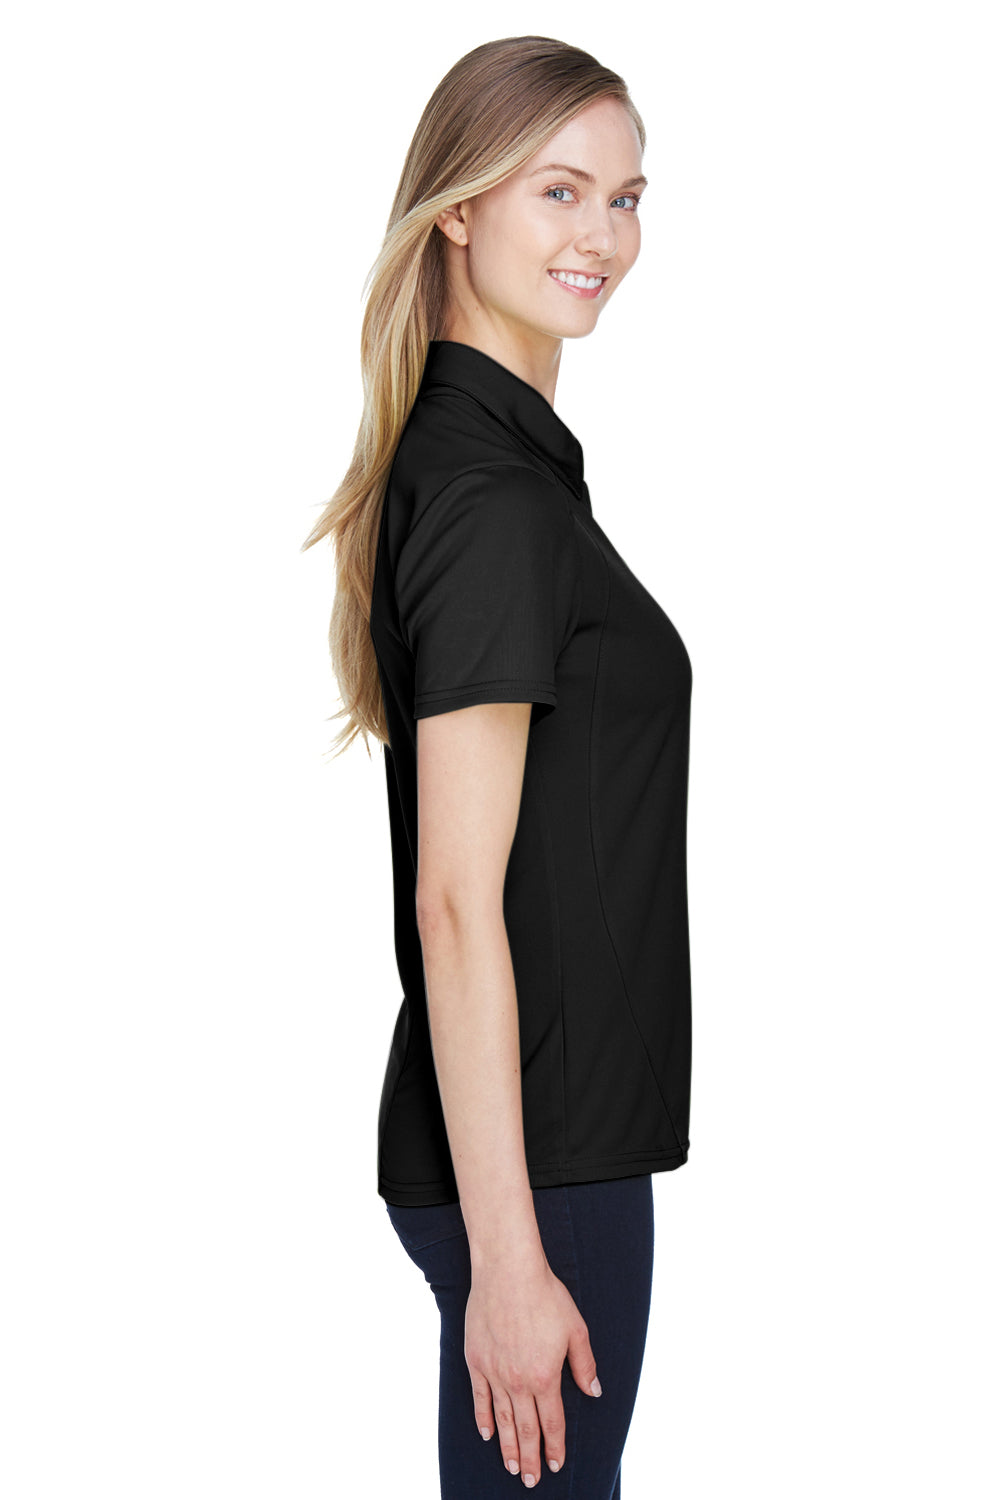 North End 78632 Womens Sport Red Performance Moisture Wicking Short Sleeve Polo Shirt Black Side